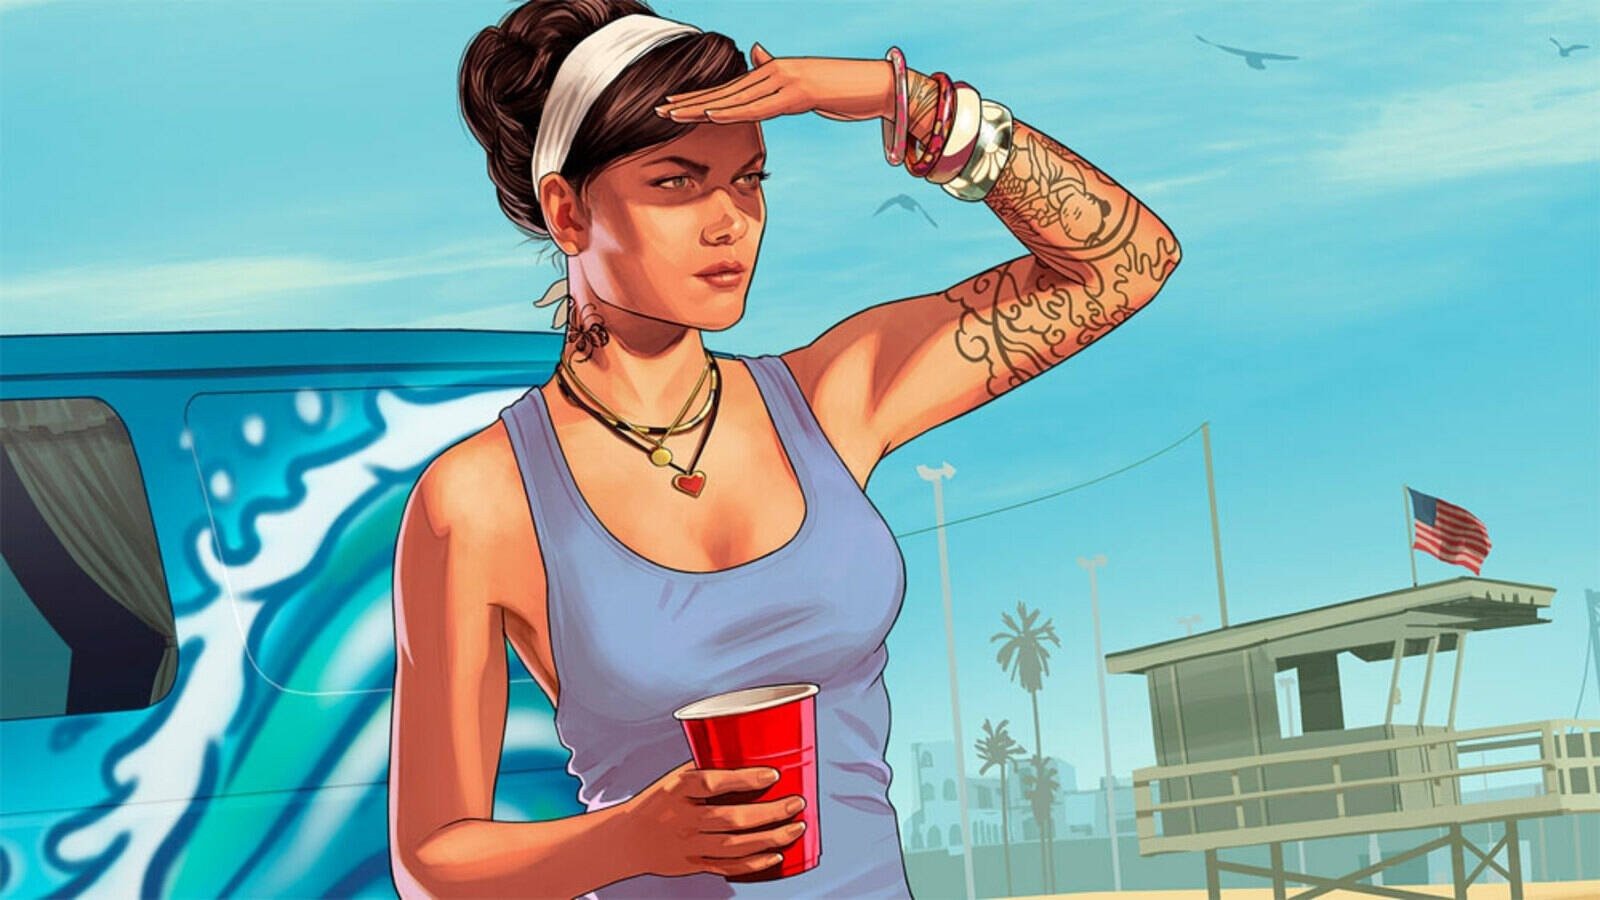 GTA 6 reveals new locations (and the map looks really huge)